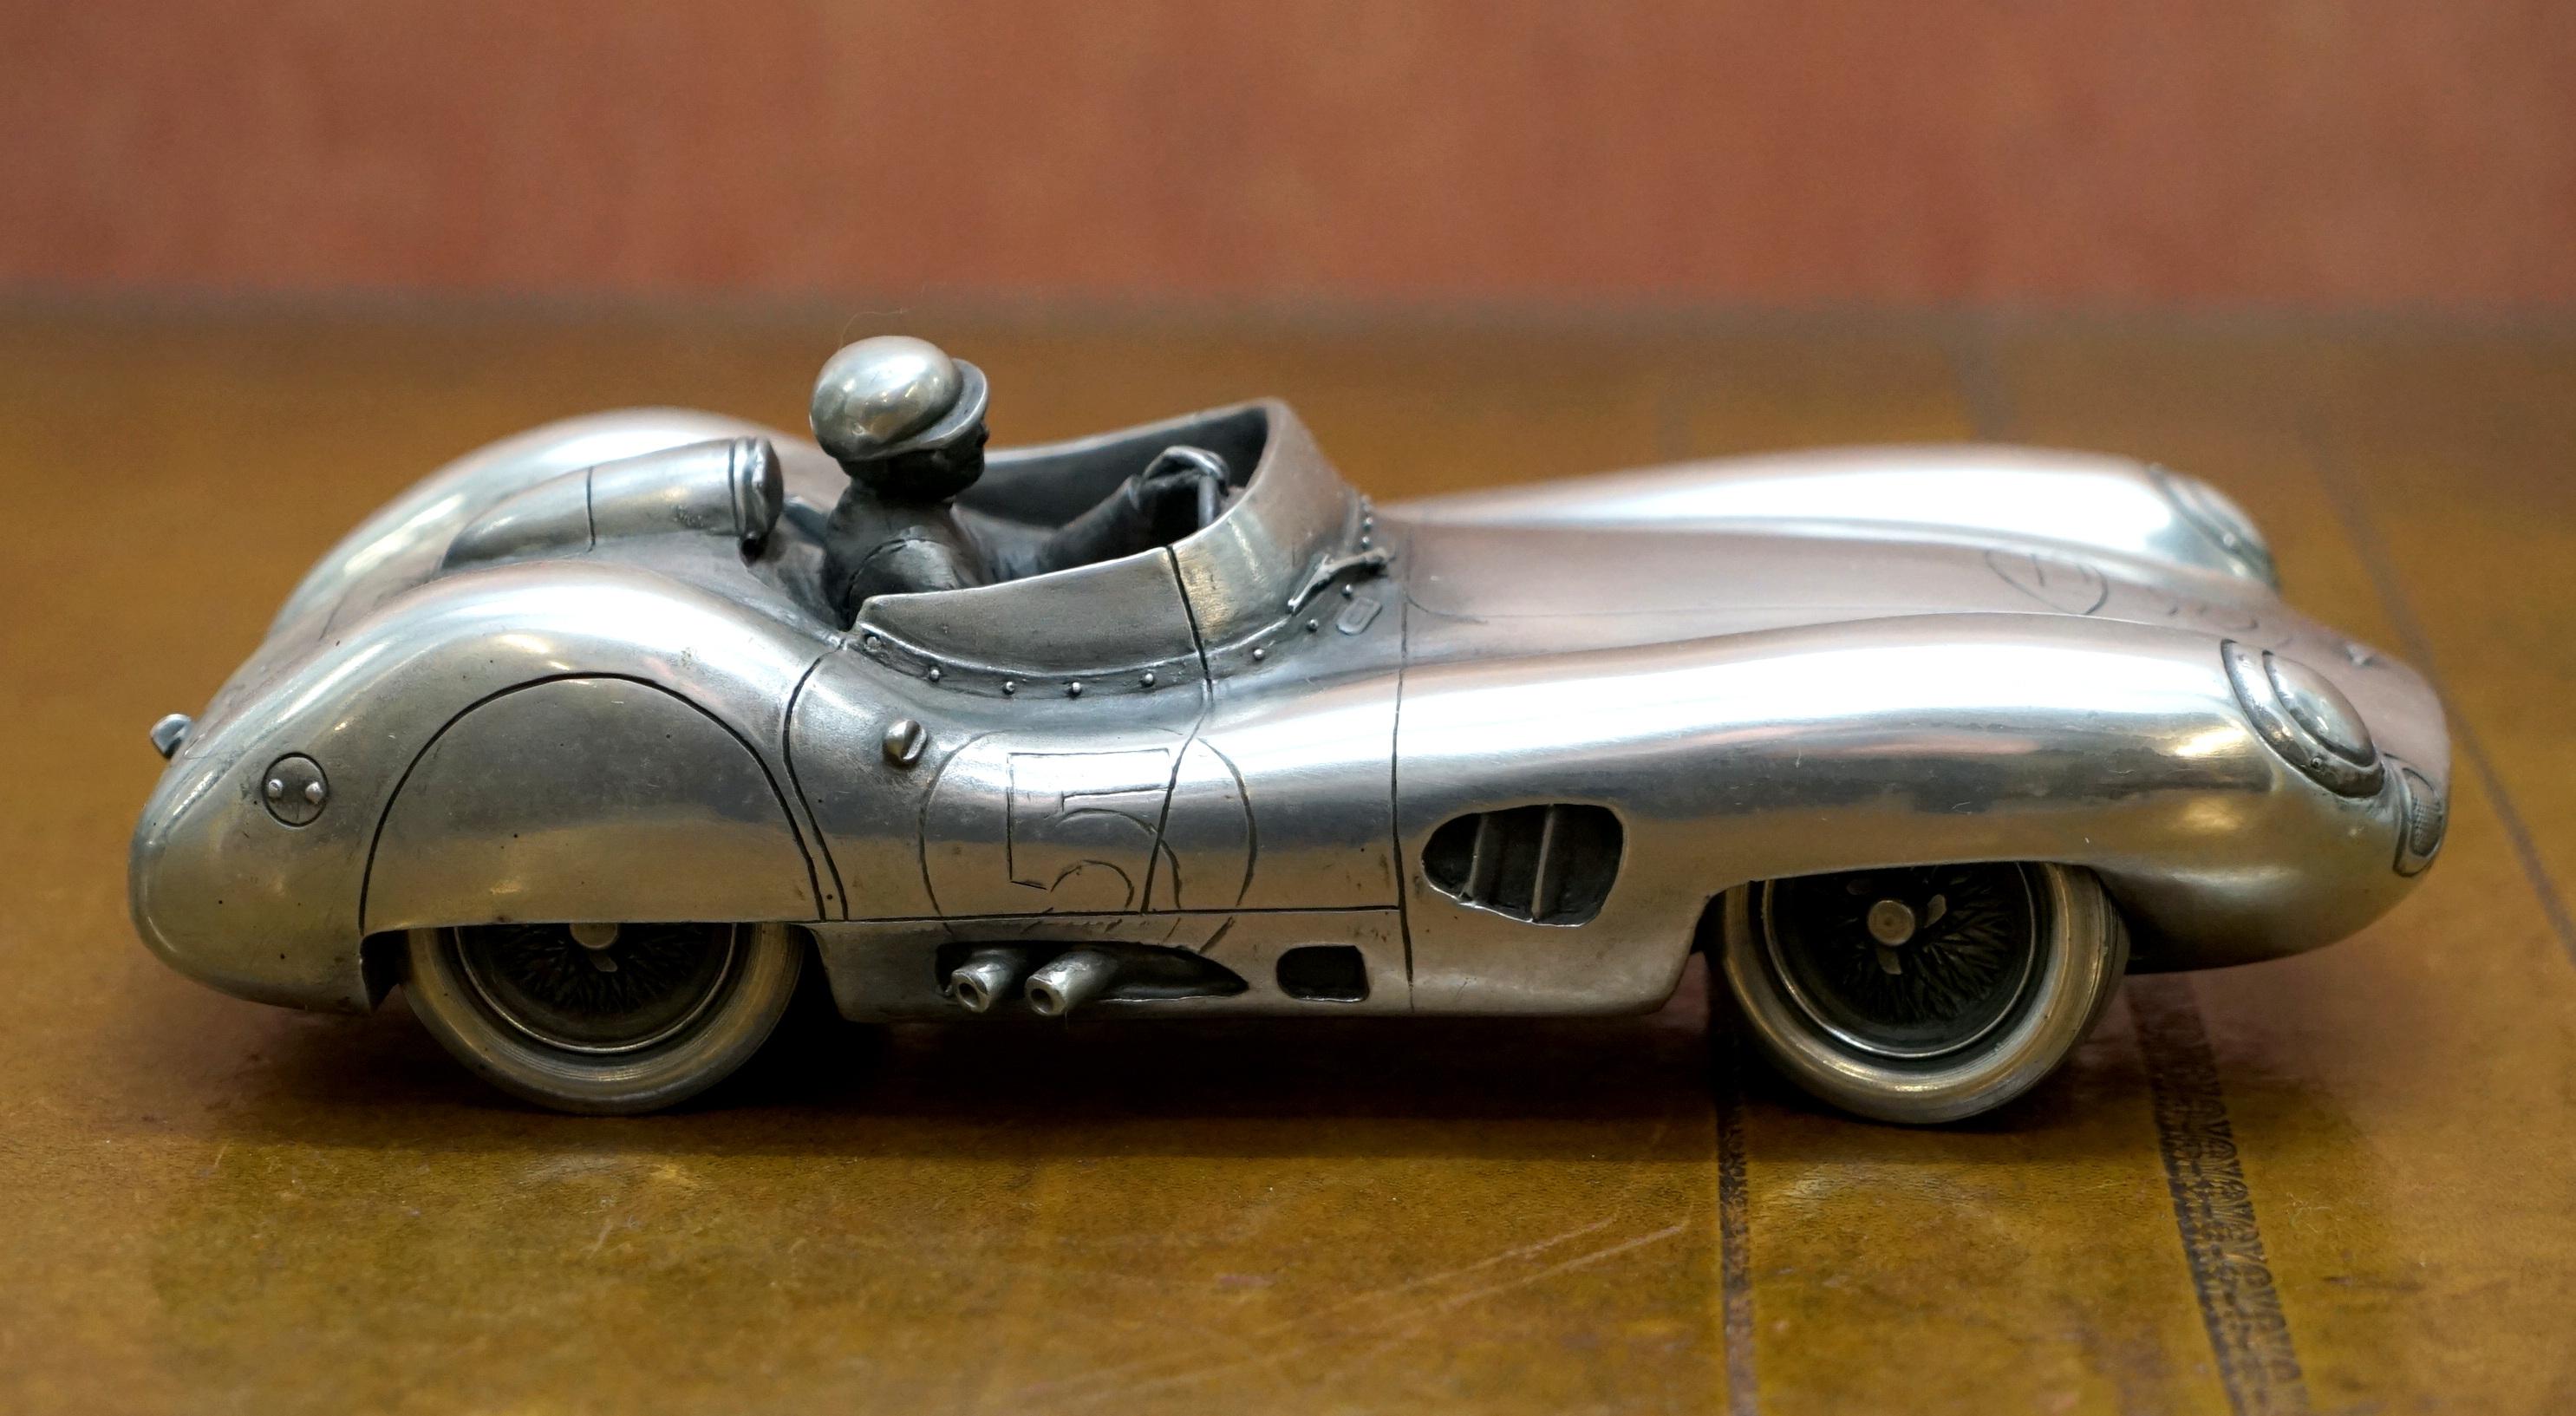 We are delighted to offer for sale this lovely original Pewter plated large compulsion gallery Aston Martin Le Mans 24 hour race DBR1 1959

This is the largest I have ever seen, its in perfect vintage condition

The Aston Martin DBR1 was a